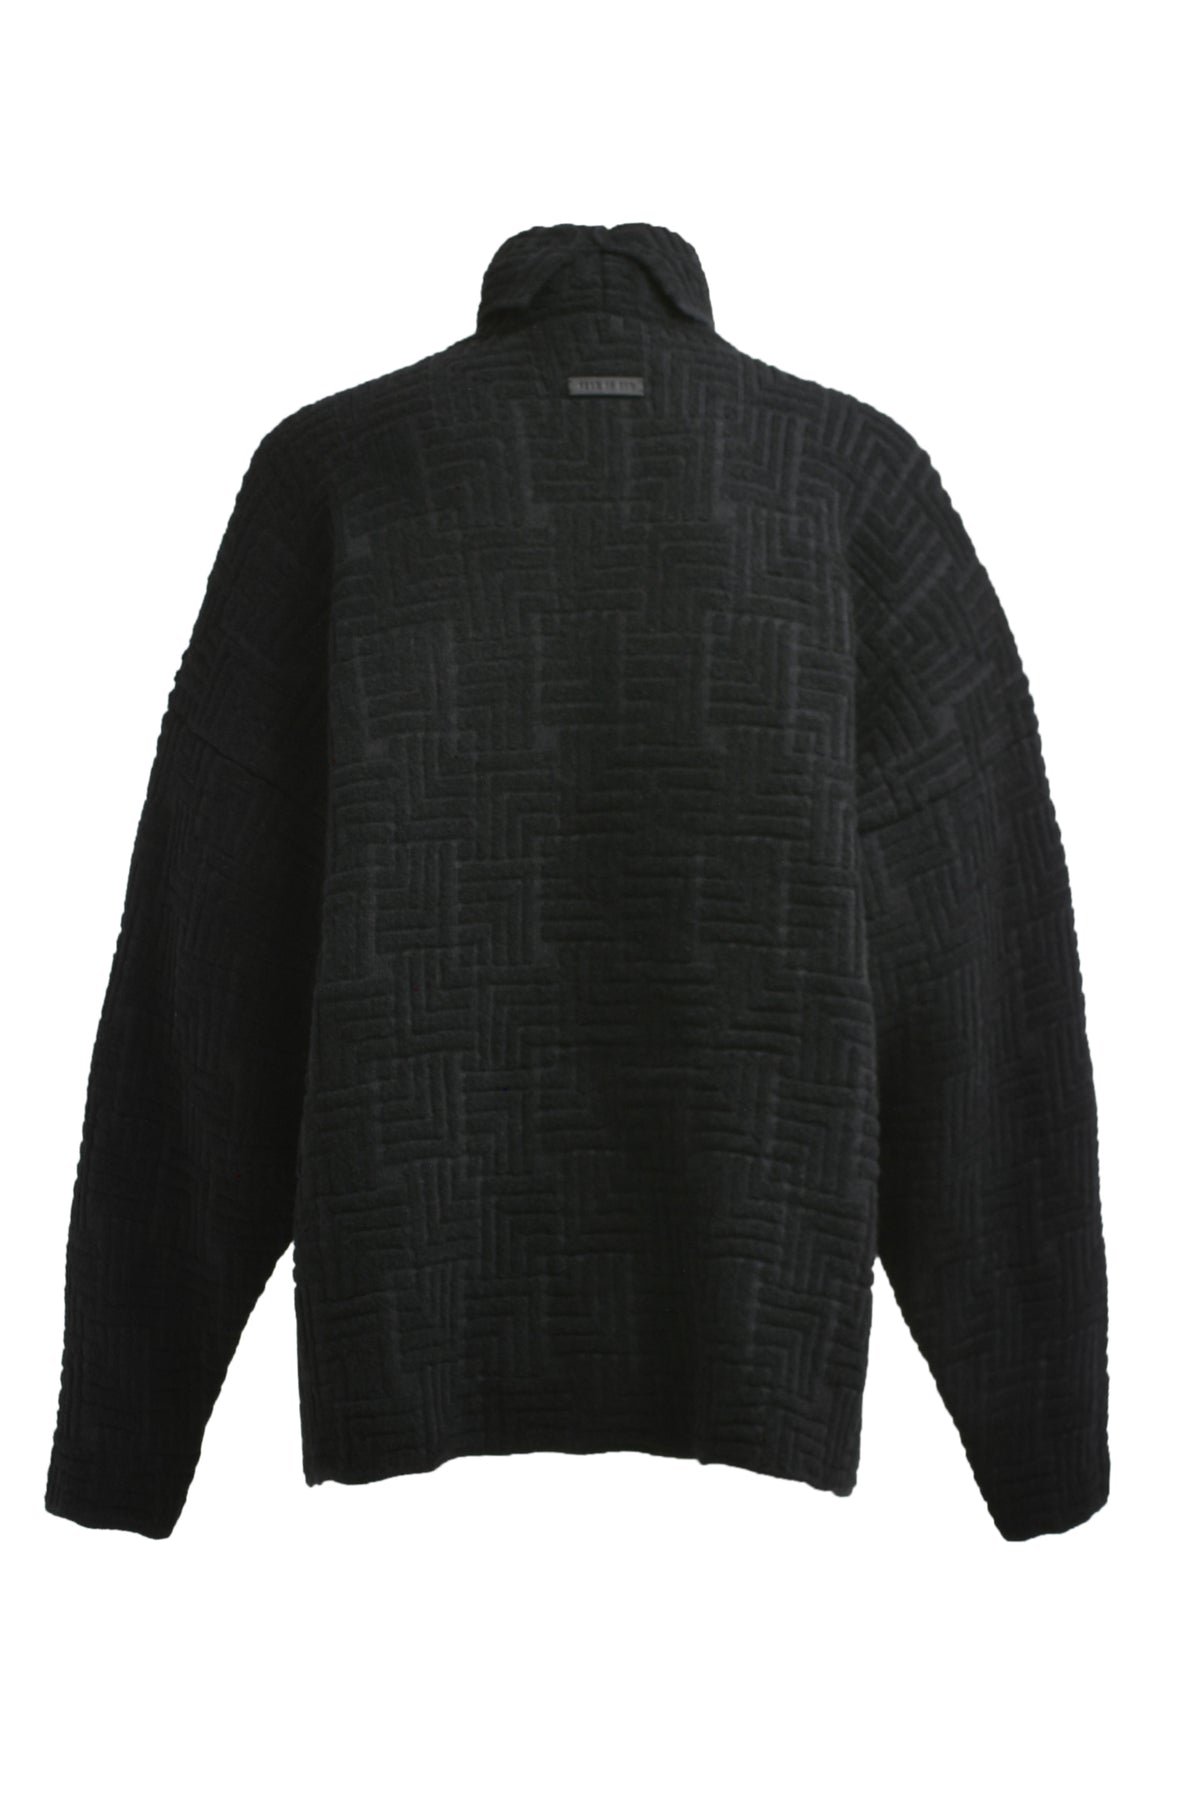 STRAIGHT NECK RELAXED SWEATER / BLK